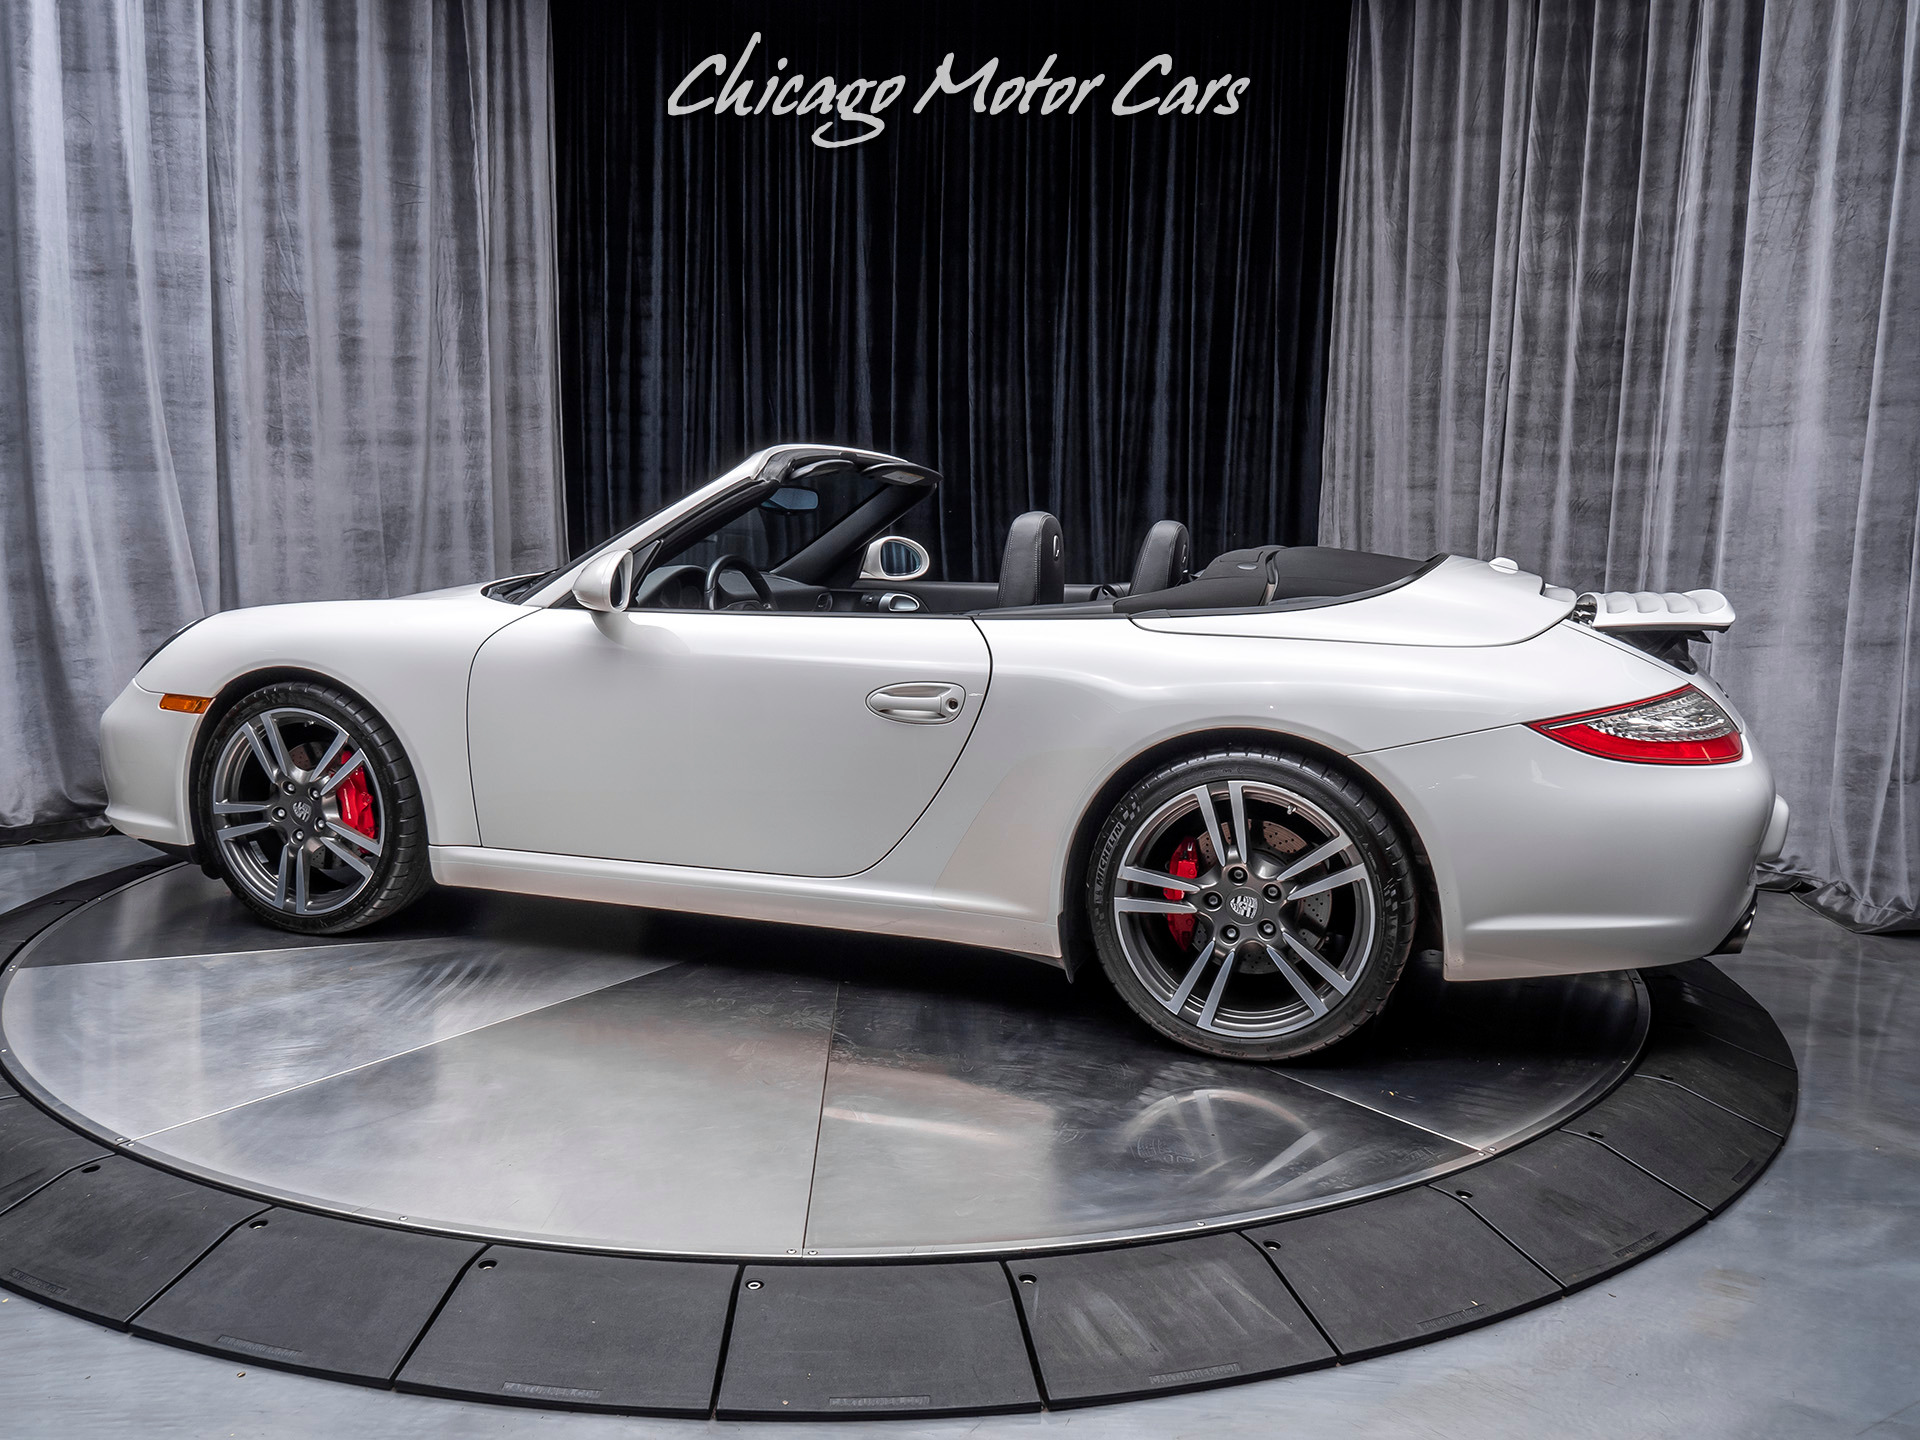 Used 2012 Porsche 997 Carrera S Convertible For Sale (Special Pricing) |  Chicago Motor Cars Stock #15981